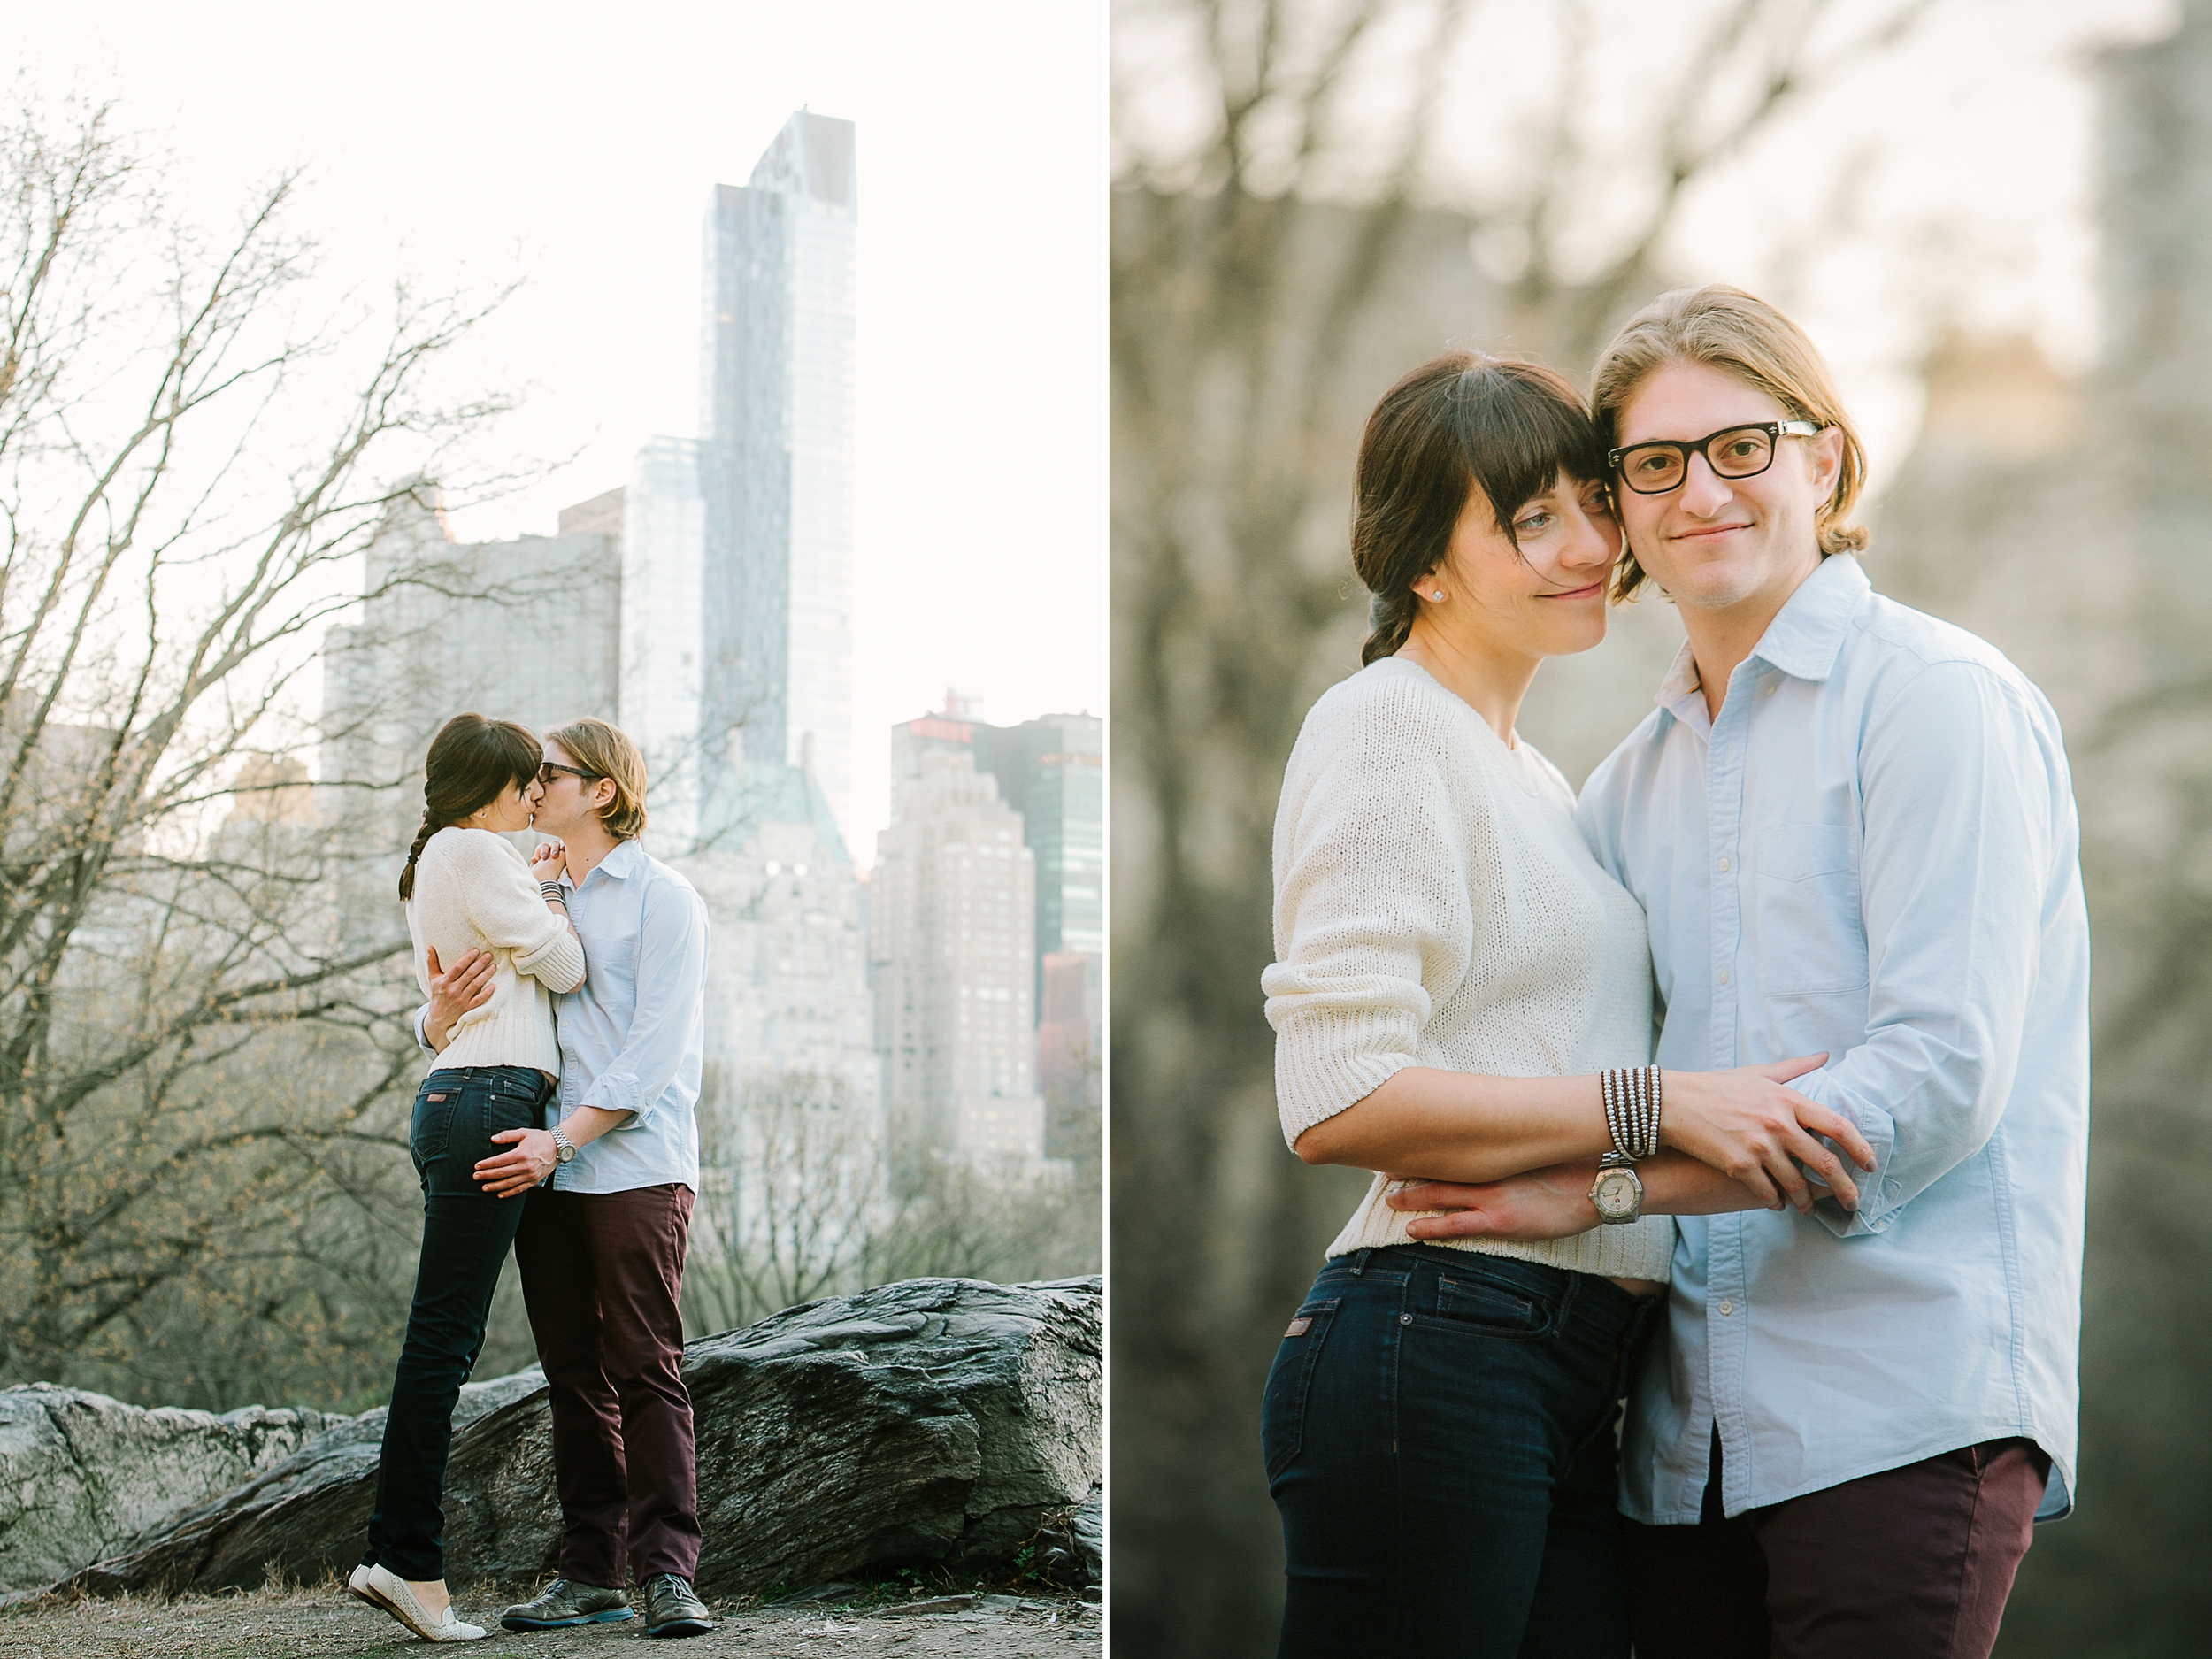 Central Park spring engagement session by Tanya Isaeva Photography